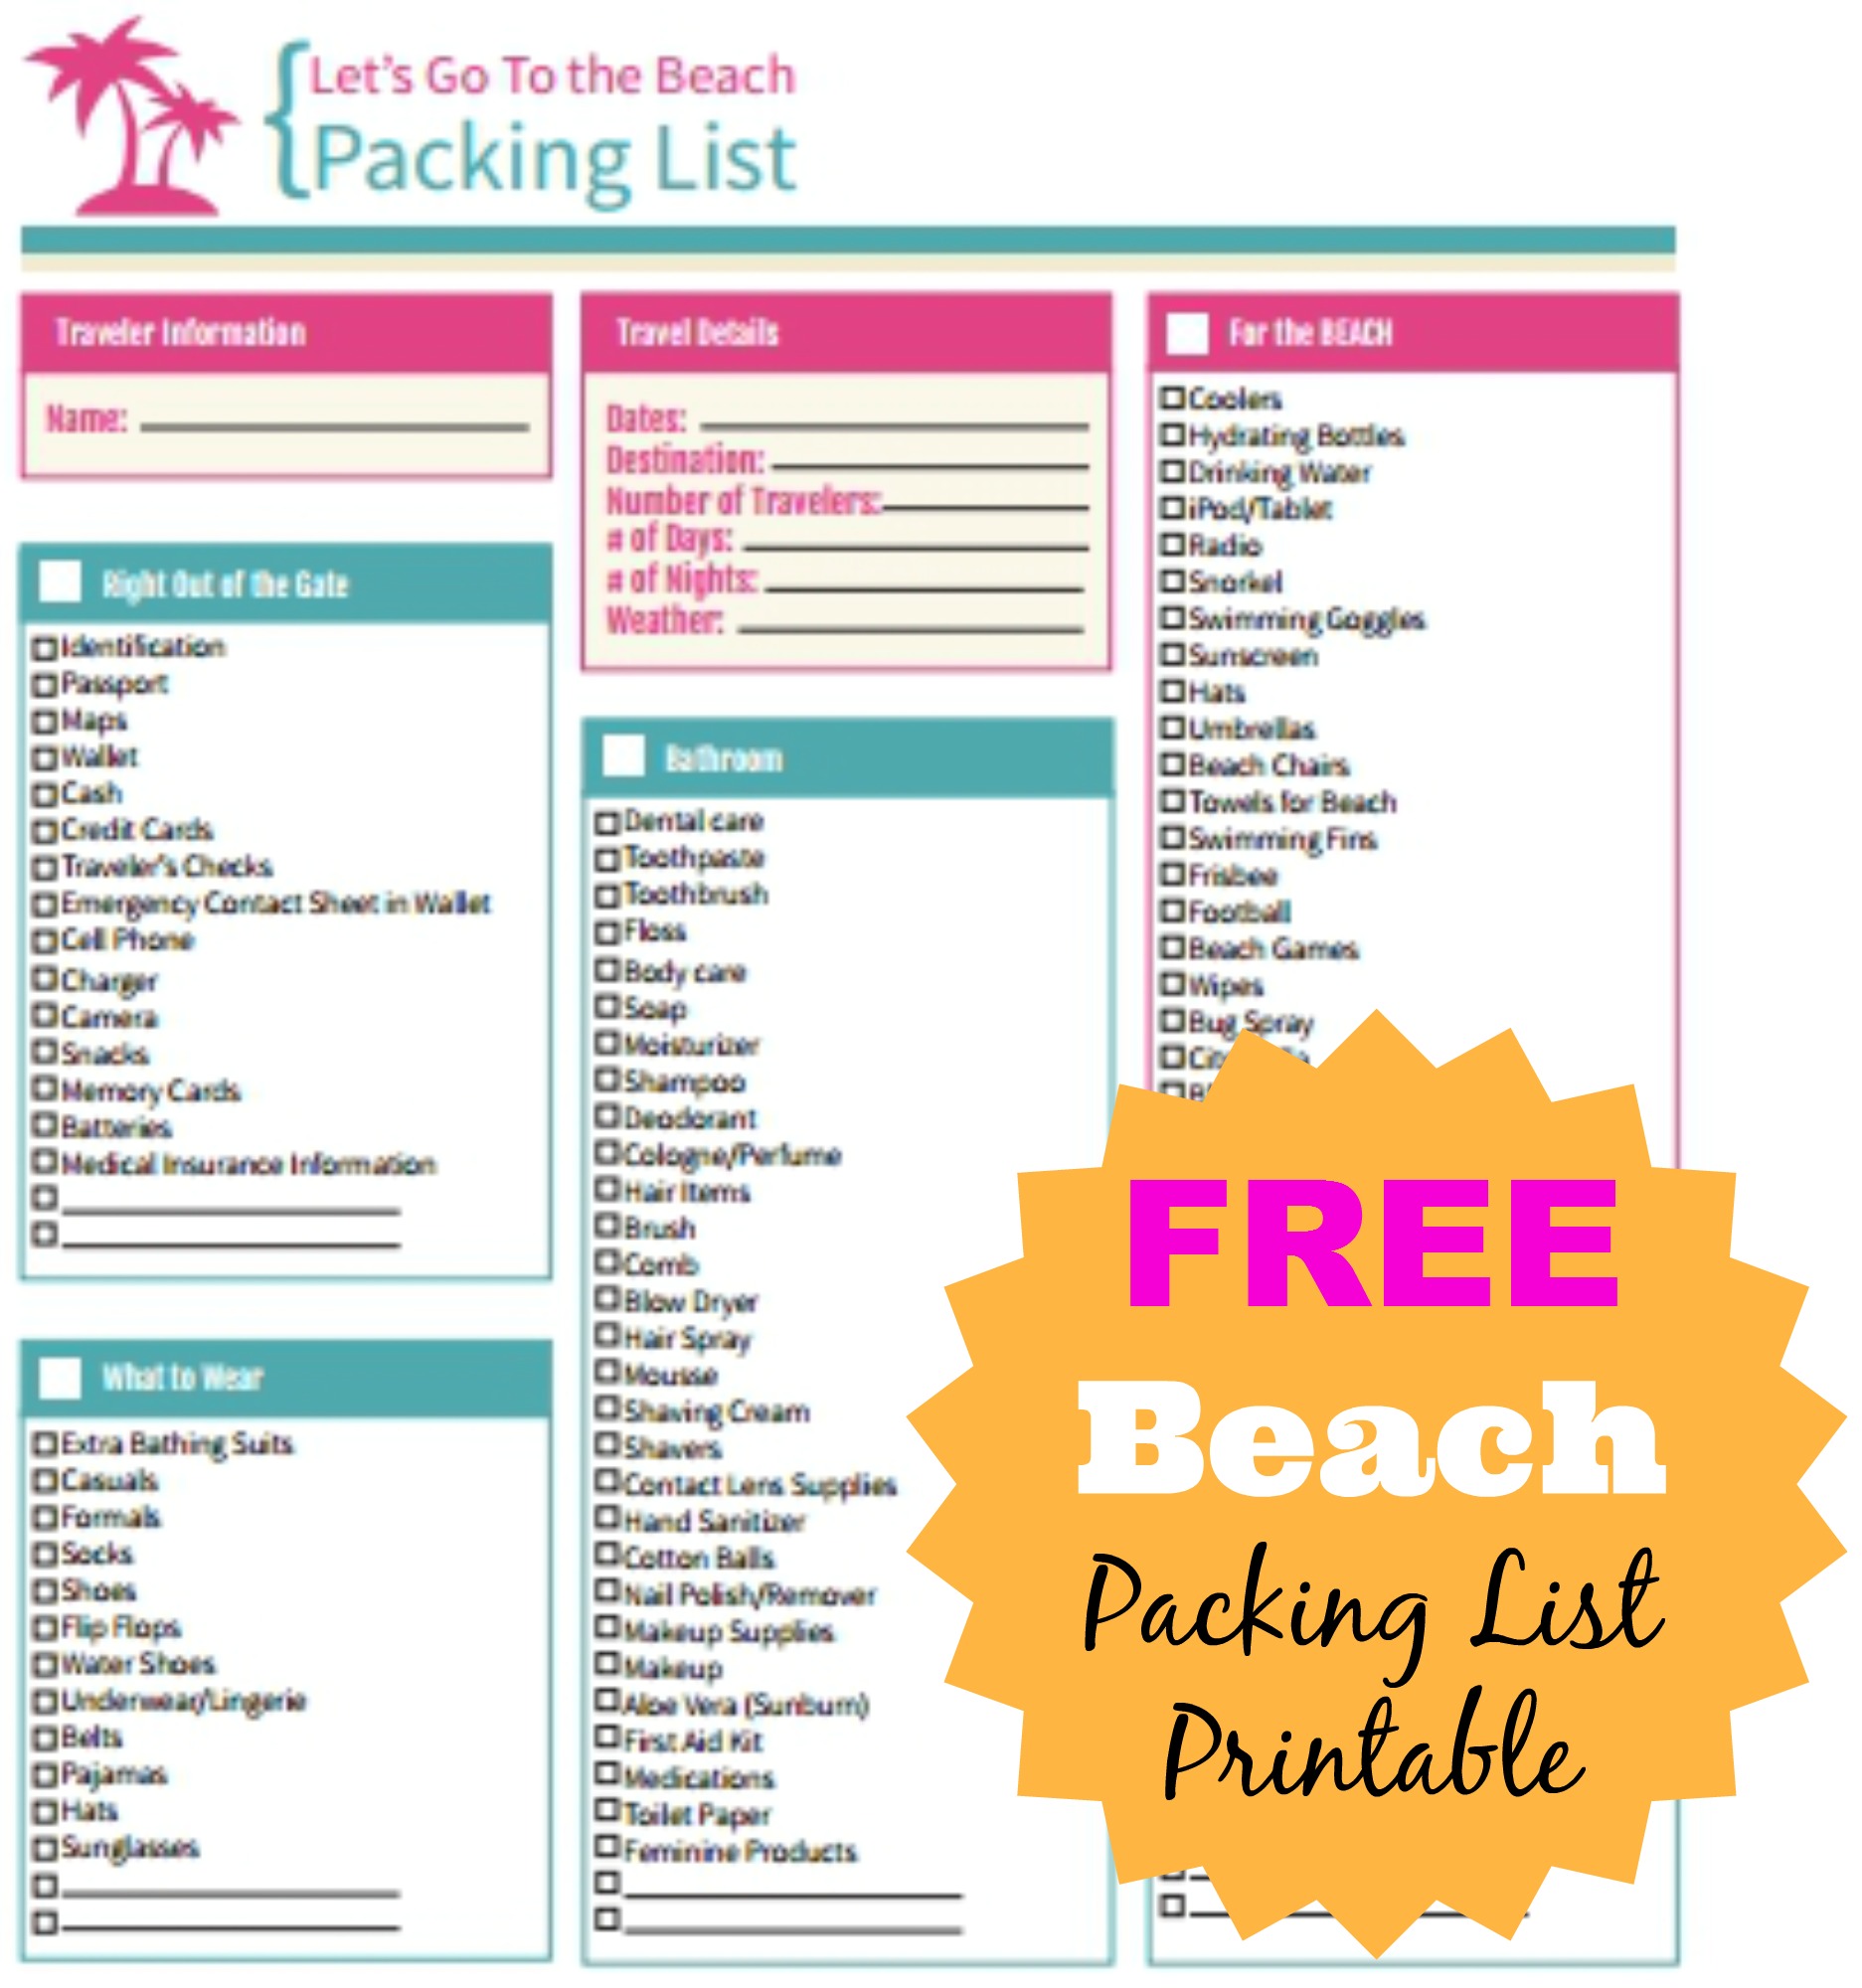 beach-vacation-packing-list-printable-that-are-playful-derrick-website